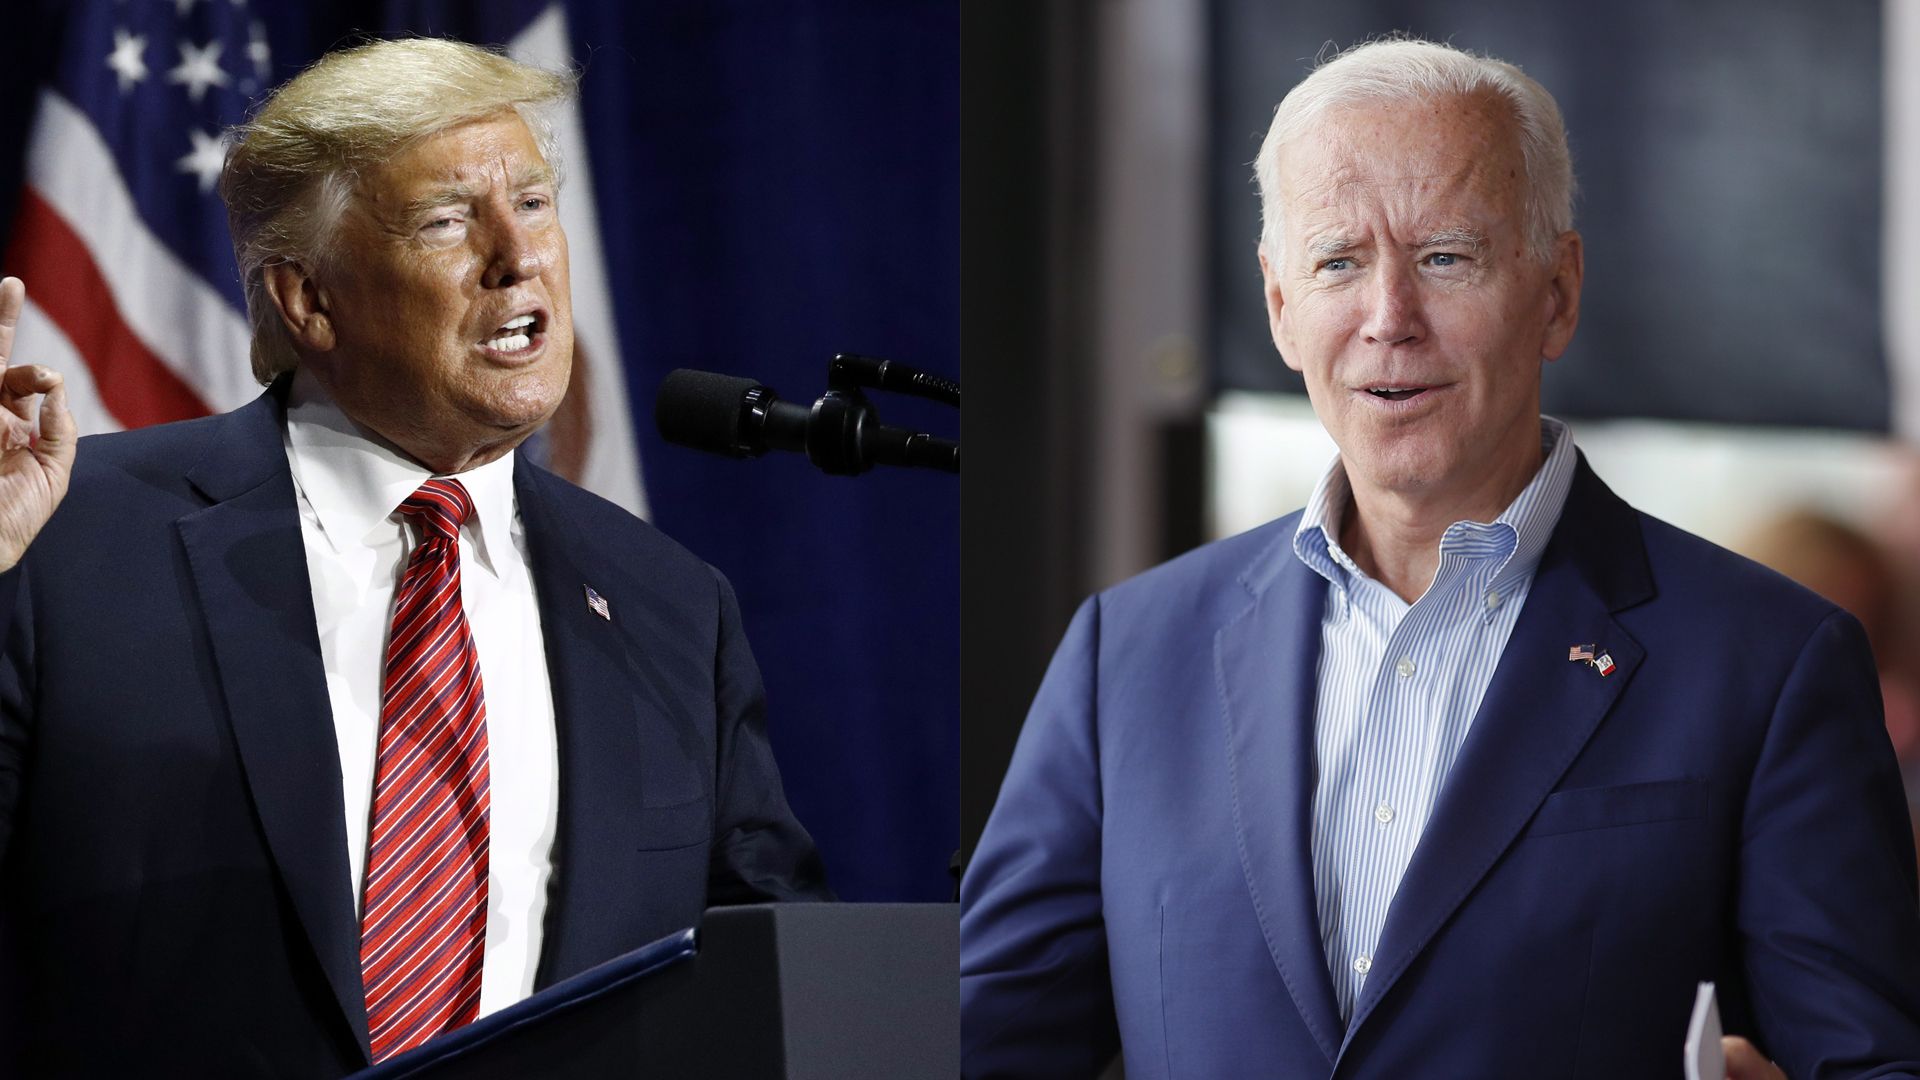 Old, confused and mentally unfit?: Trump and Biden fend off similar attacks